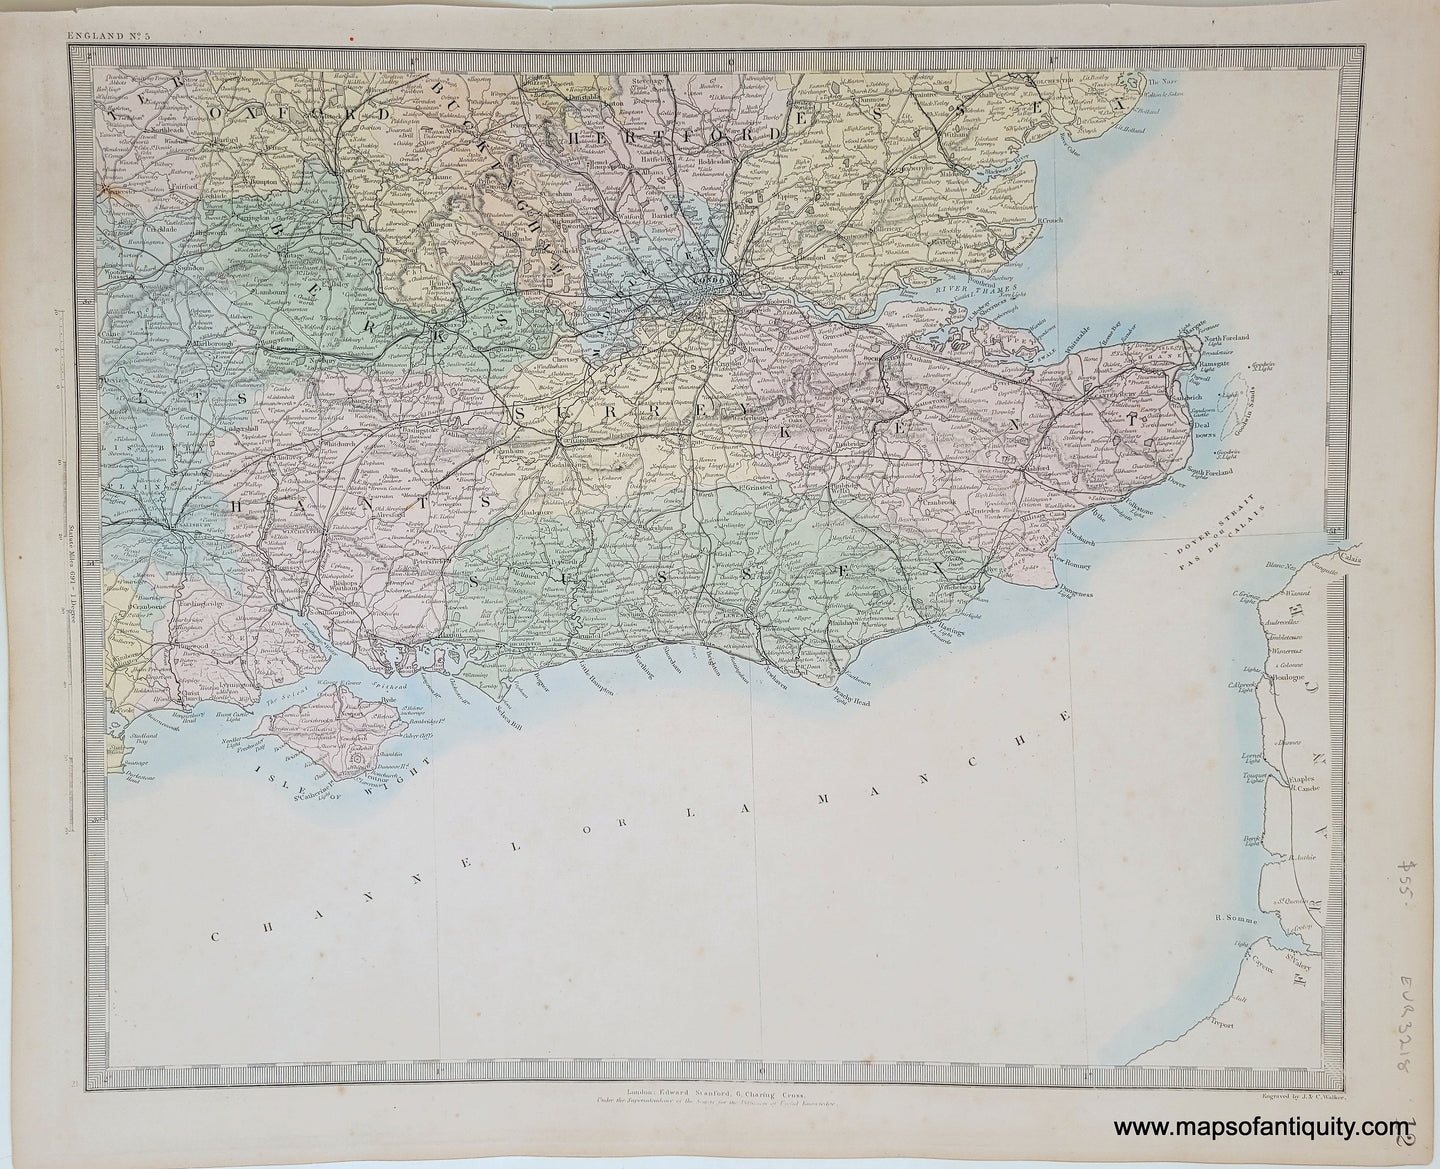 Genuine-Antique-Map-England-and-Wales-in-six-sheets-sheet-5-England-and-Wales--1860-SDUK-Society-for-the-Diffusion-of-Useful-Knowledge-Maps-Of-Antiquity-1800s-19th-century